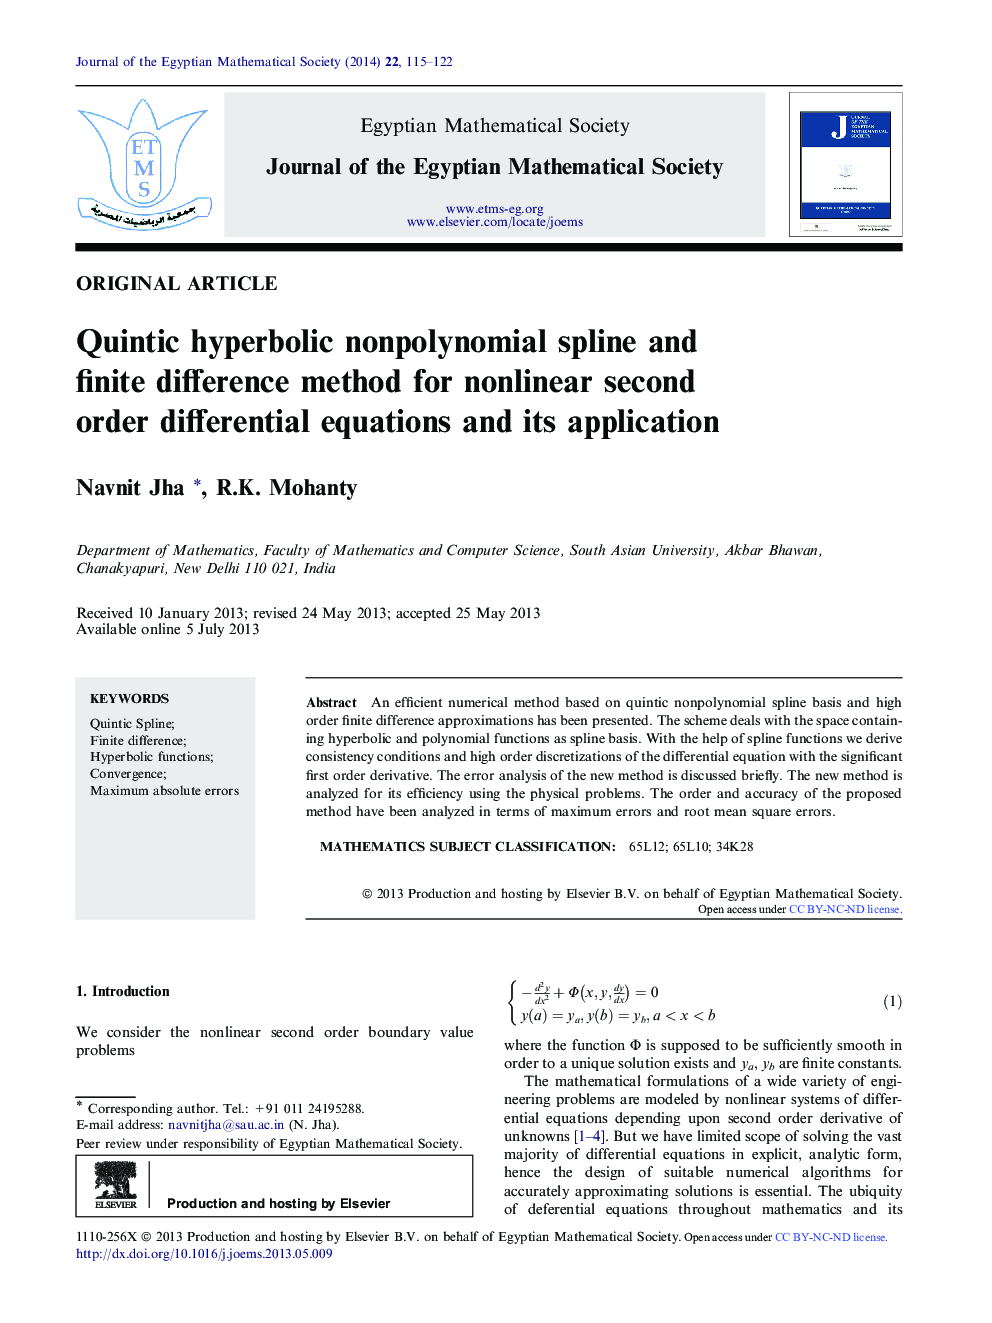 Quintic hyperbolic nonpolynomial spline and finite difference method for nonlinear second order differential equations and its application 